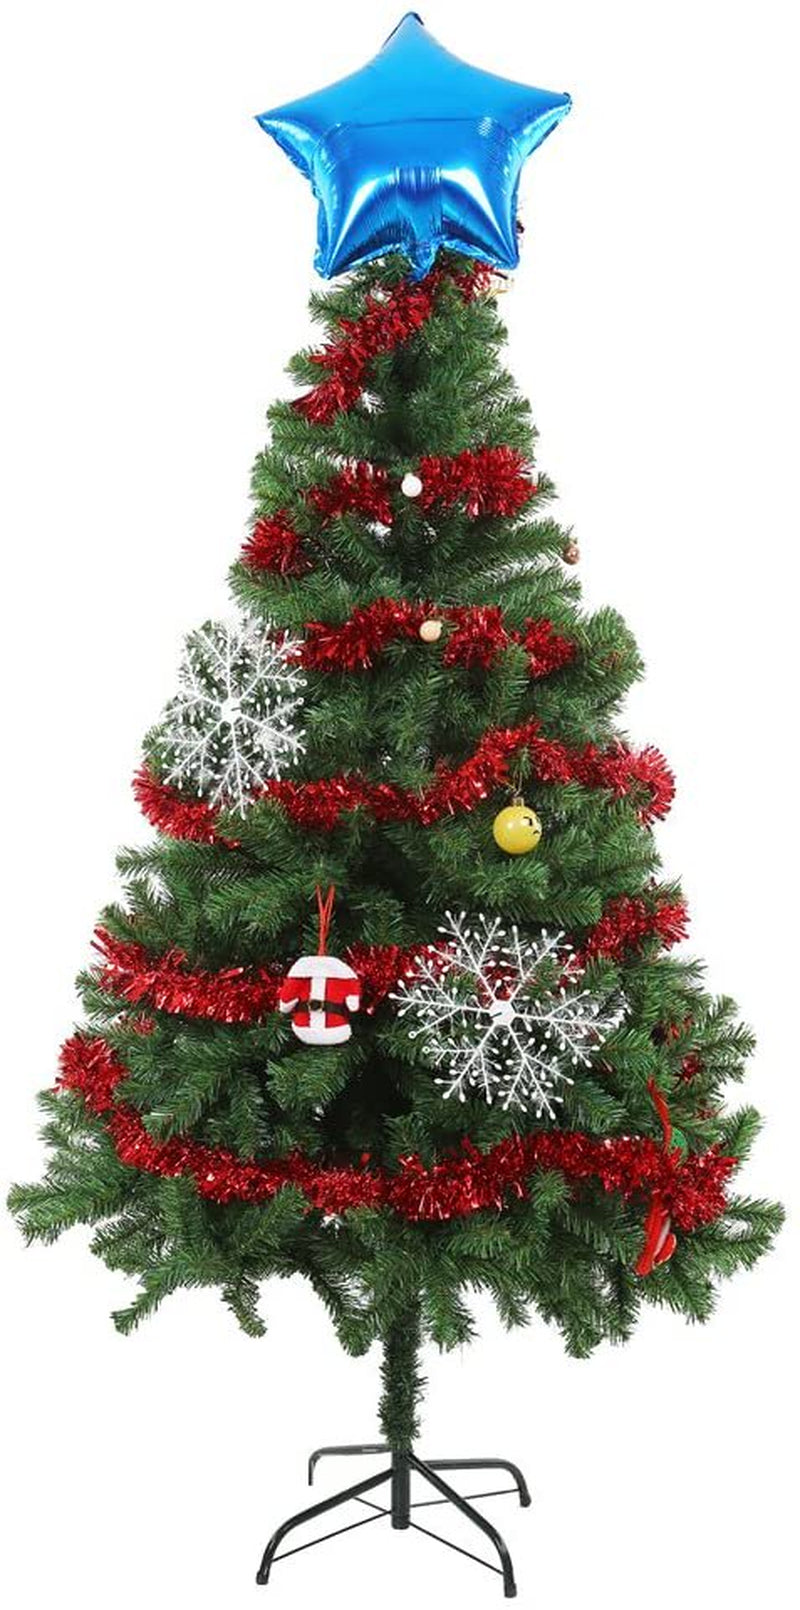 Red Tinsel Garland Christmas Tree Decorations Wedding Birthday Party Supplies for 16.5 FEET Long